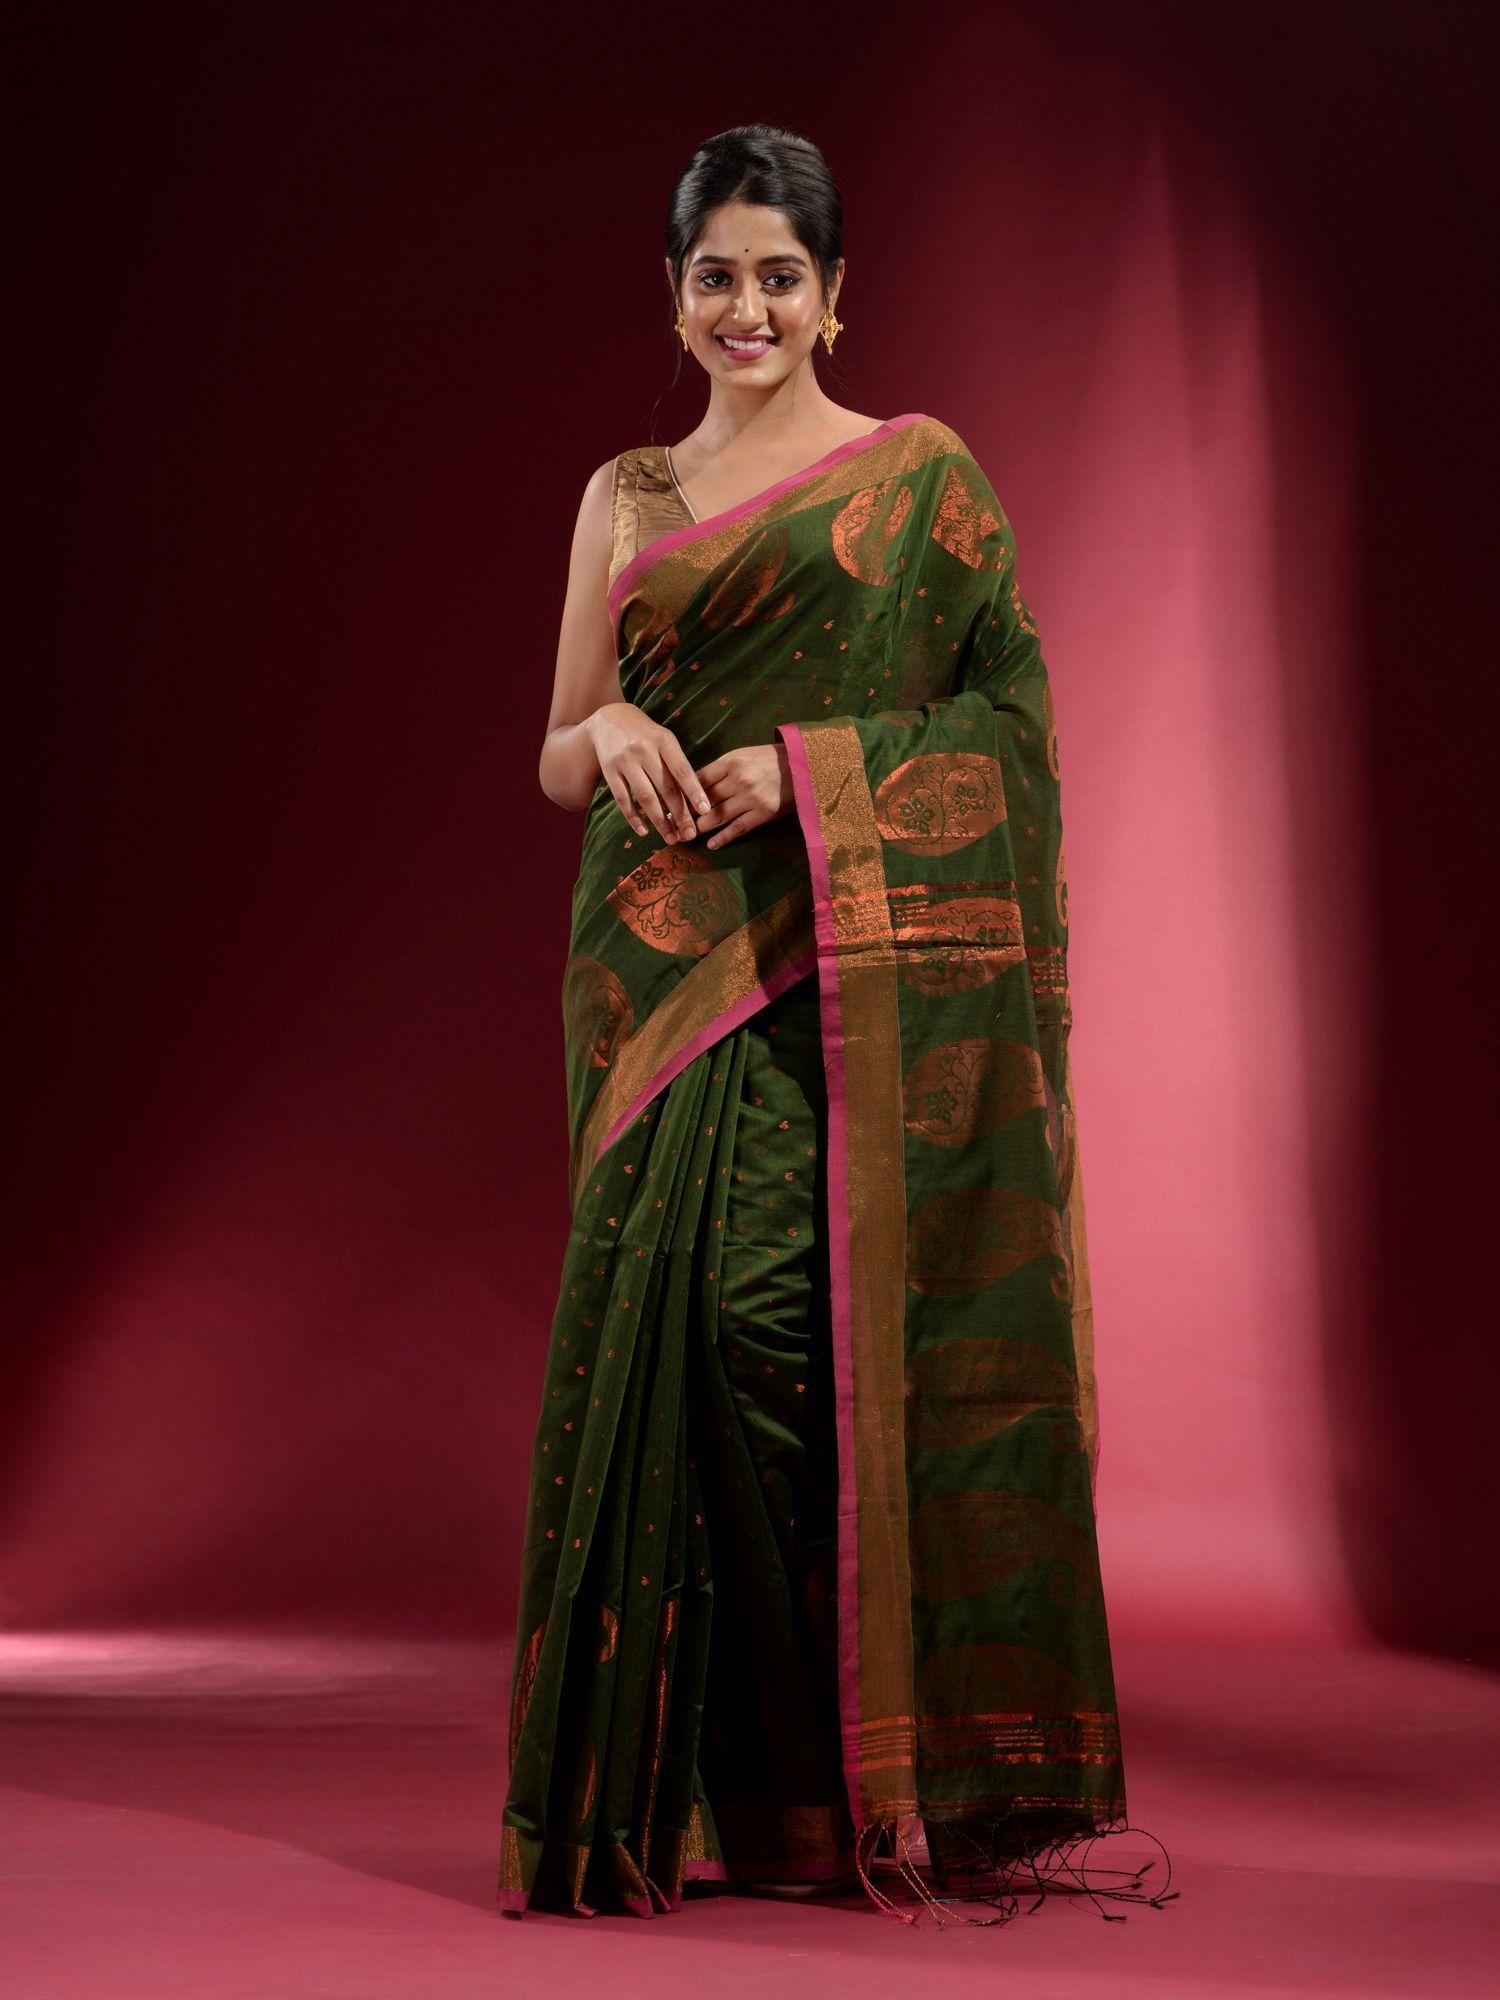 Sap Green with Zari Paisley Motif and Floral Design Saree with Unstitched Blouse